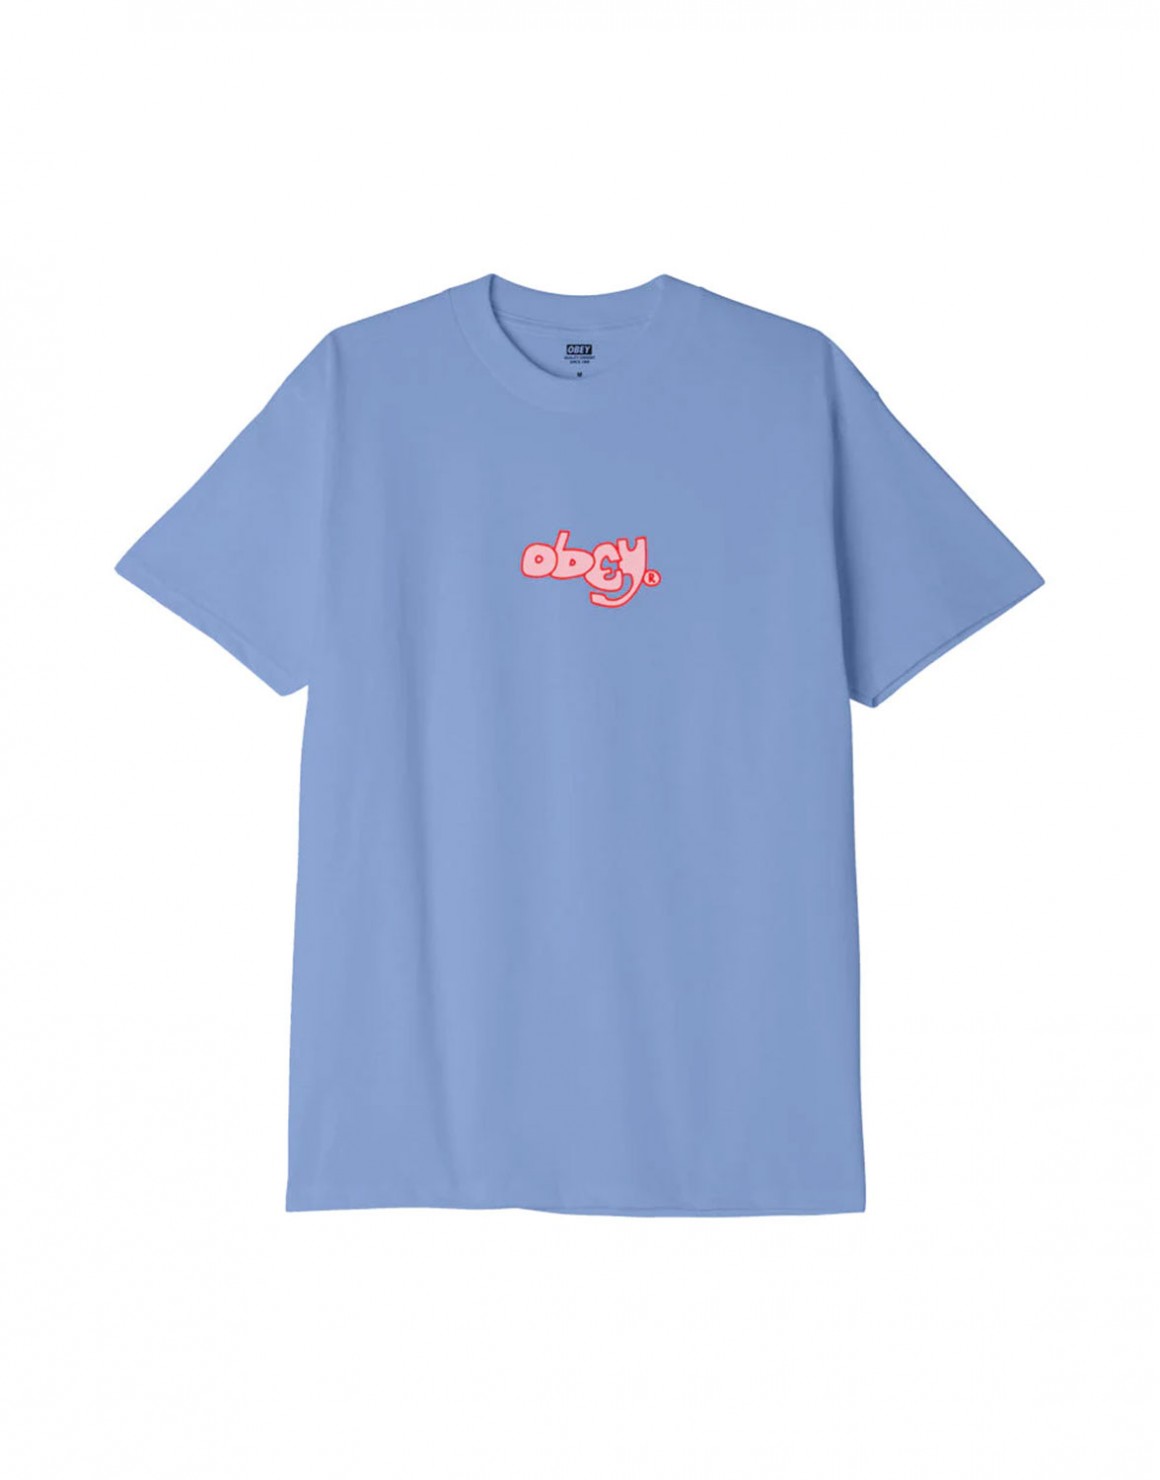 Obey Obey Tag Tee